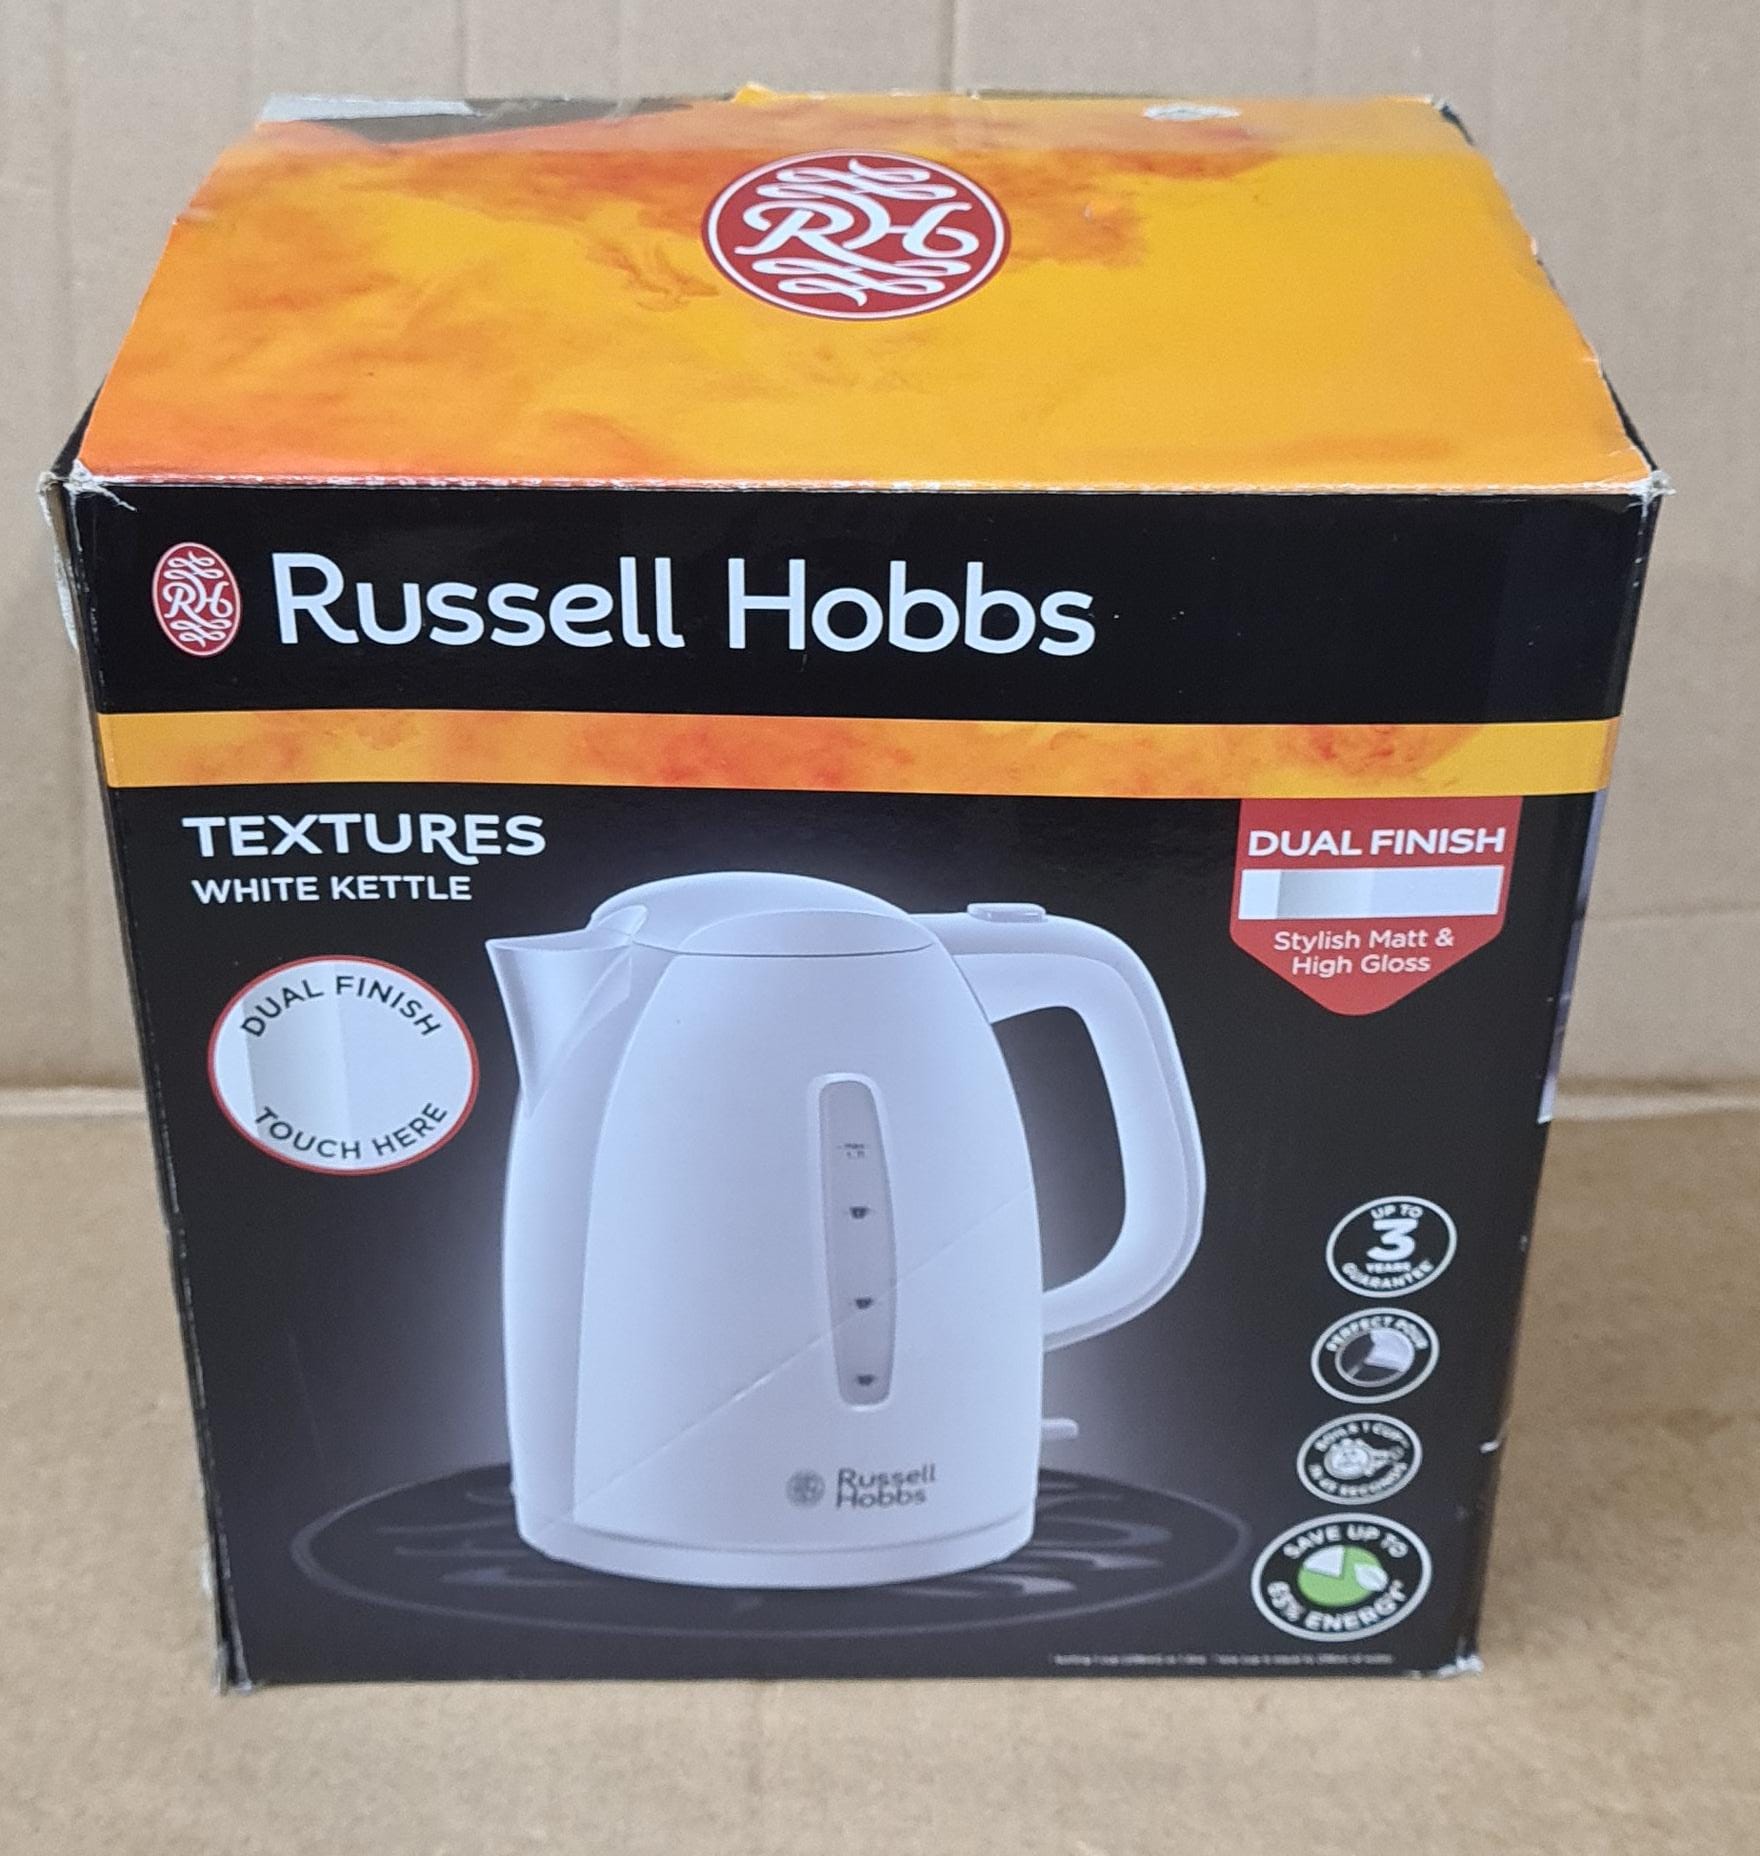 Russell Hobbs Textures White Kettle - 5711